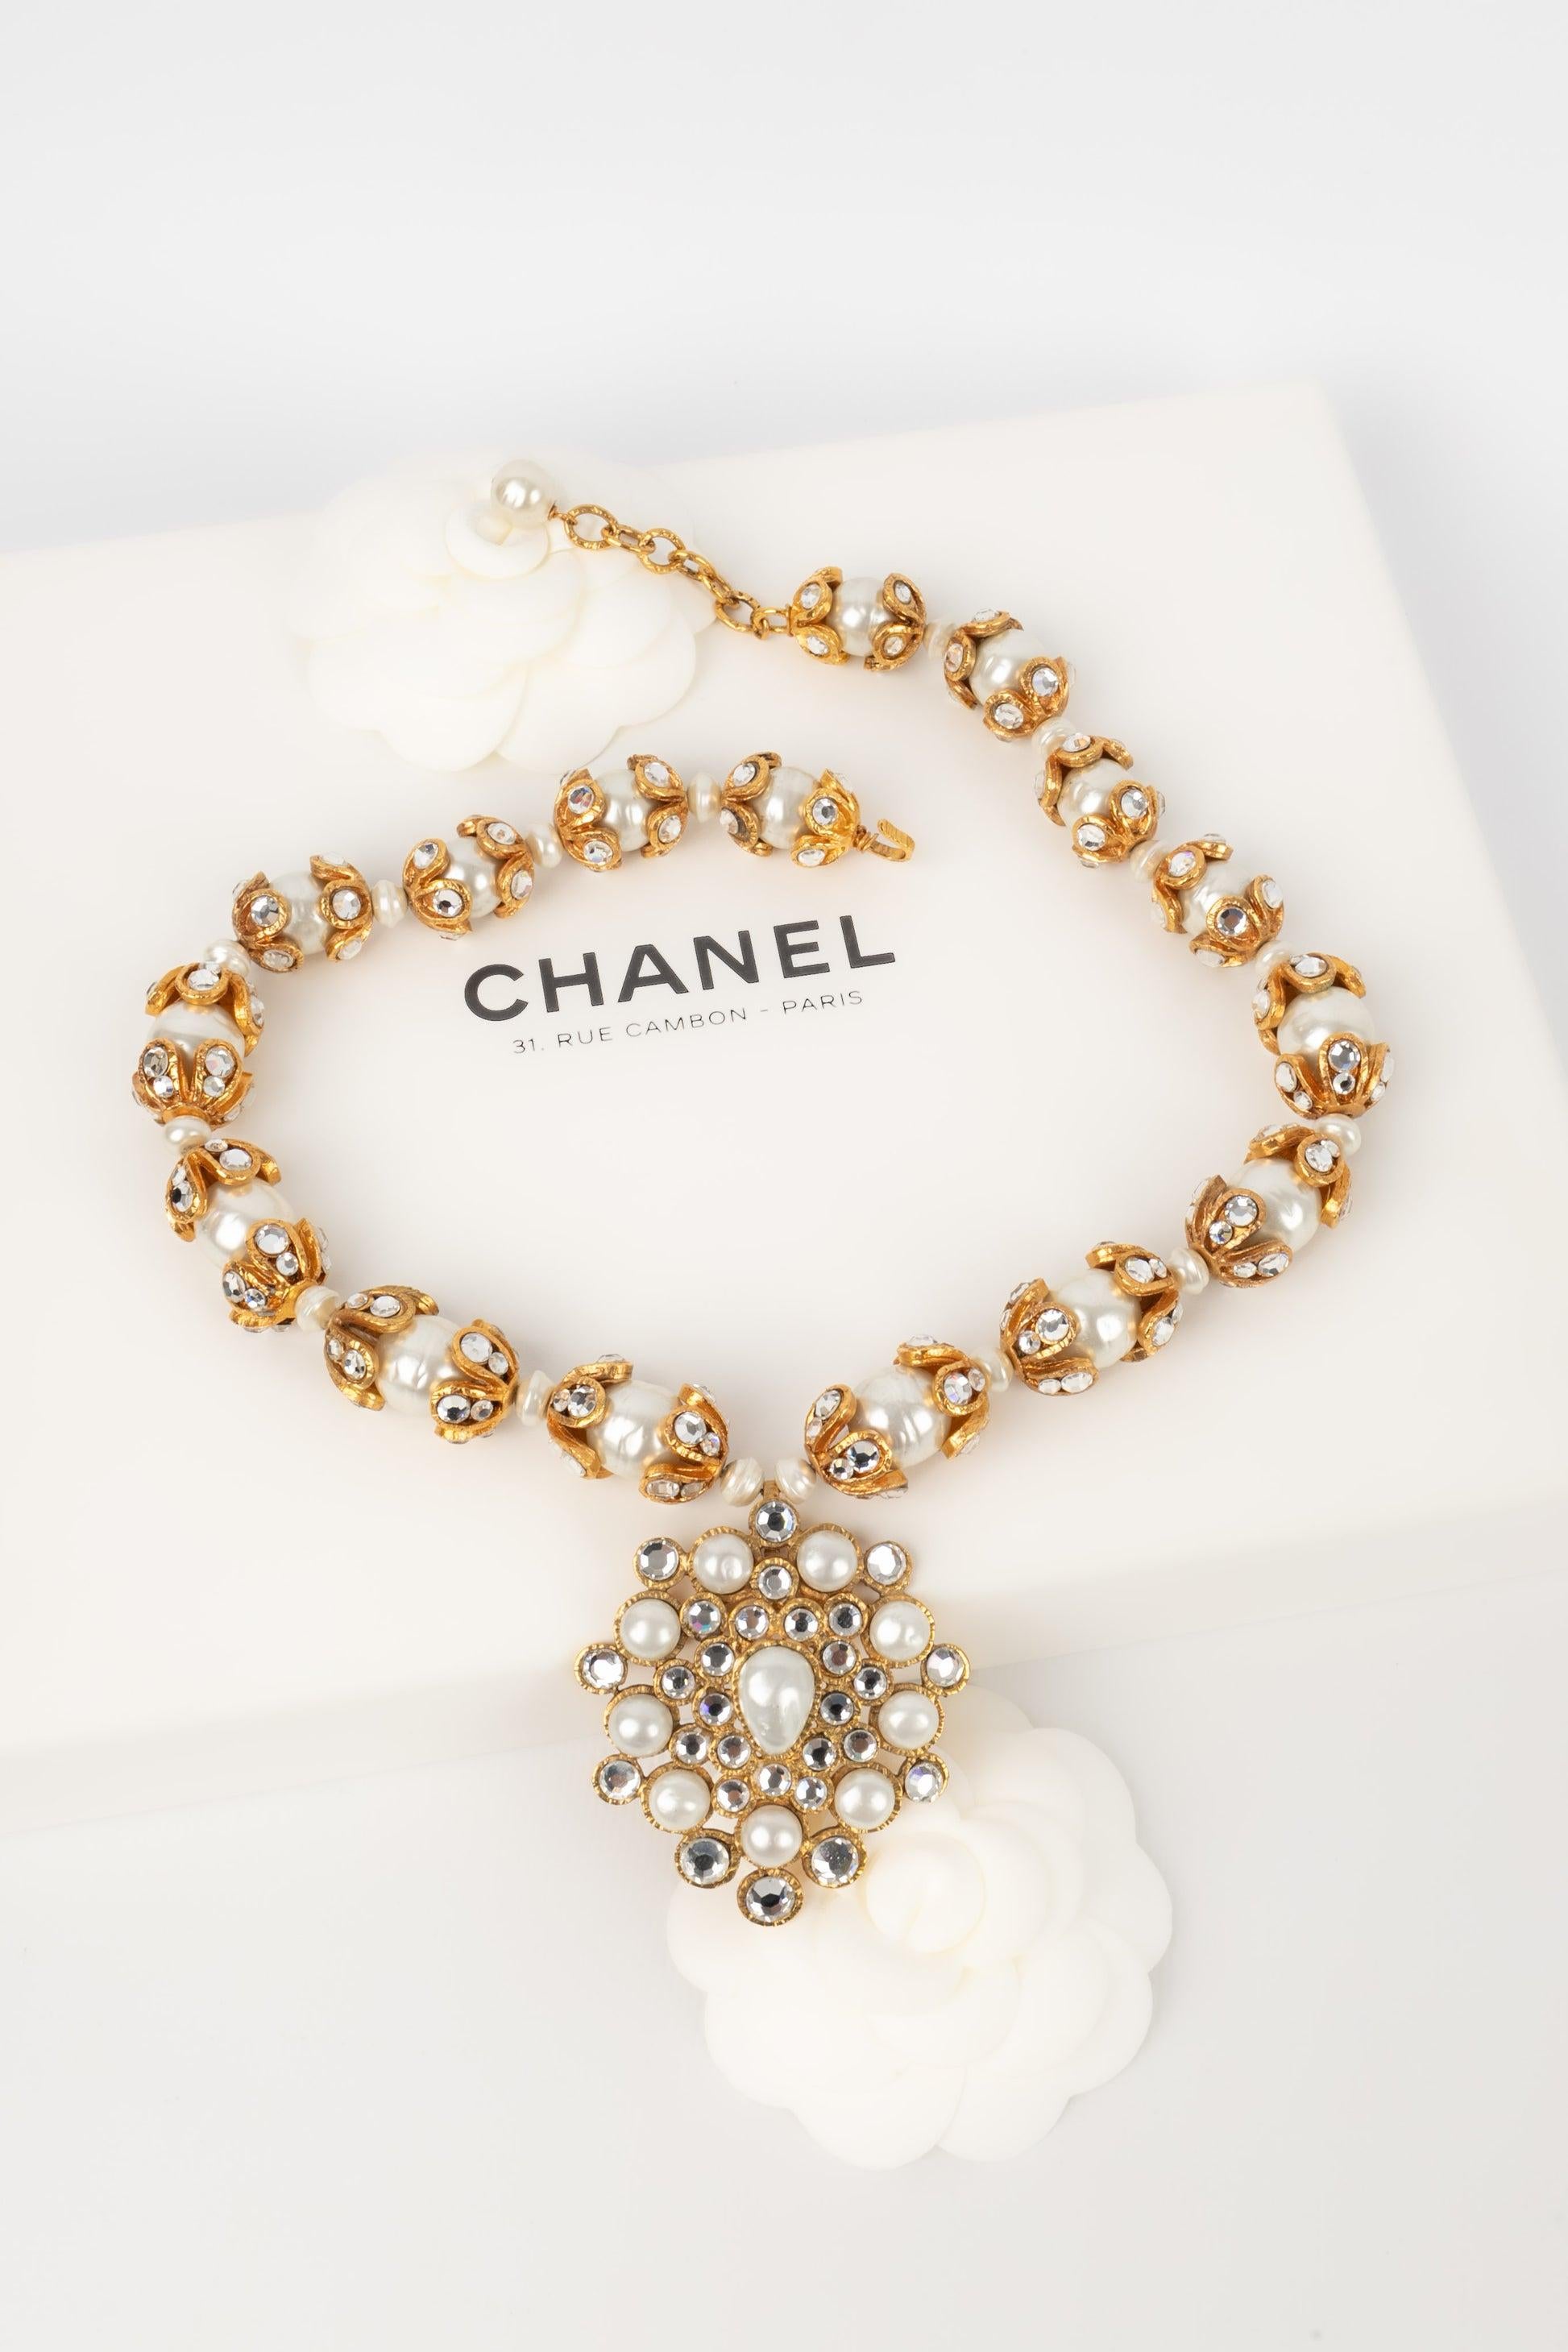 Chanel Pearls and Rhinestones Necklace, Fall 1996 For Sale 5